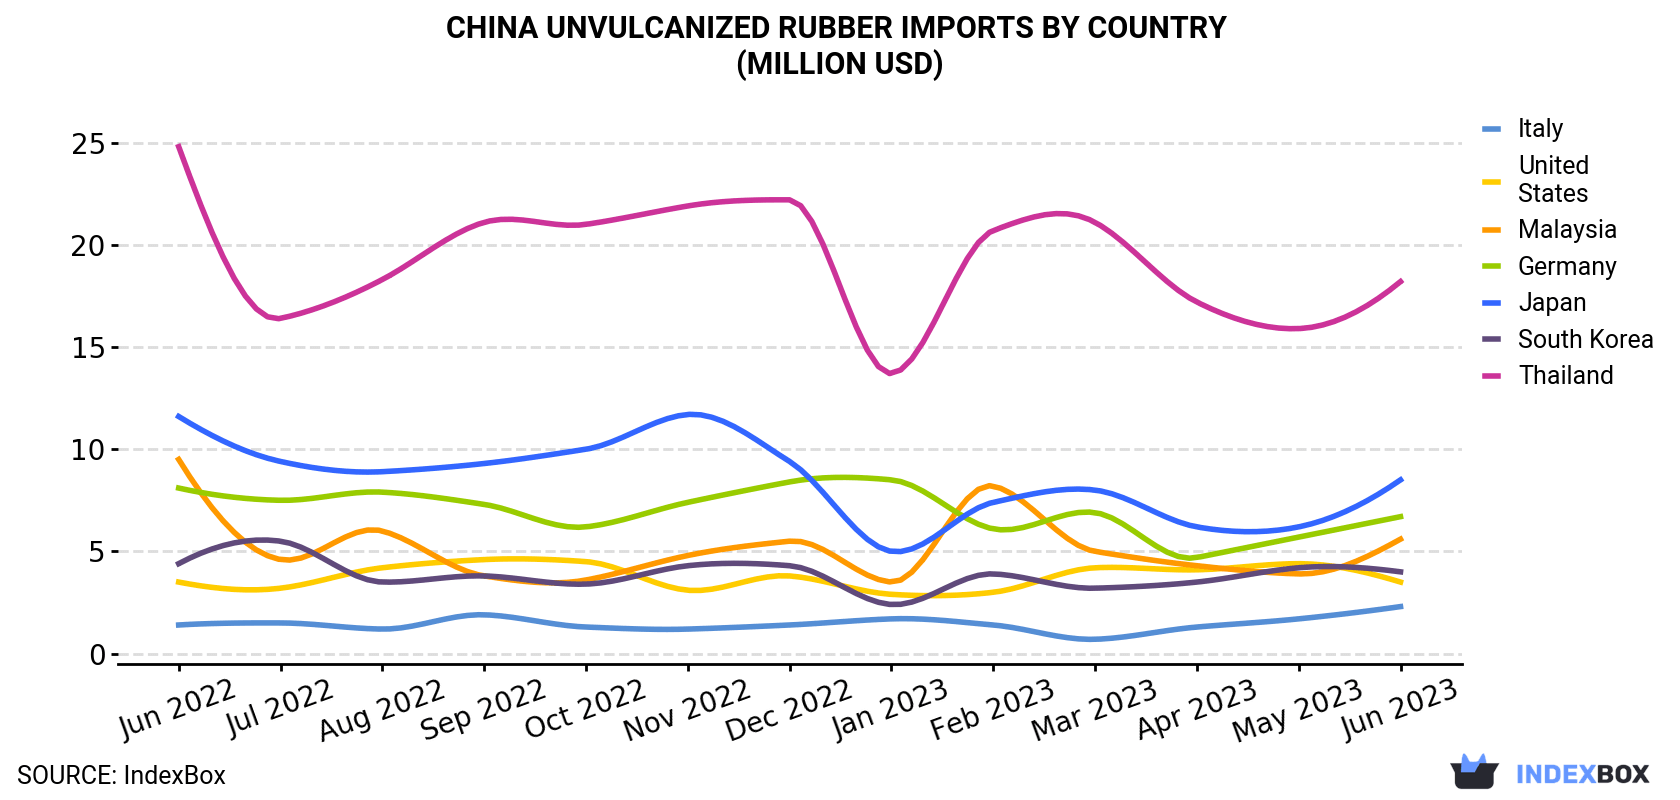 China Unvulcanized Rubber Imports By Country (Million USD)